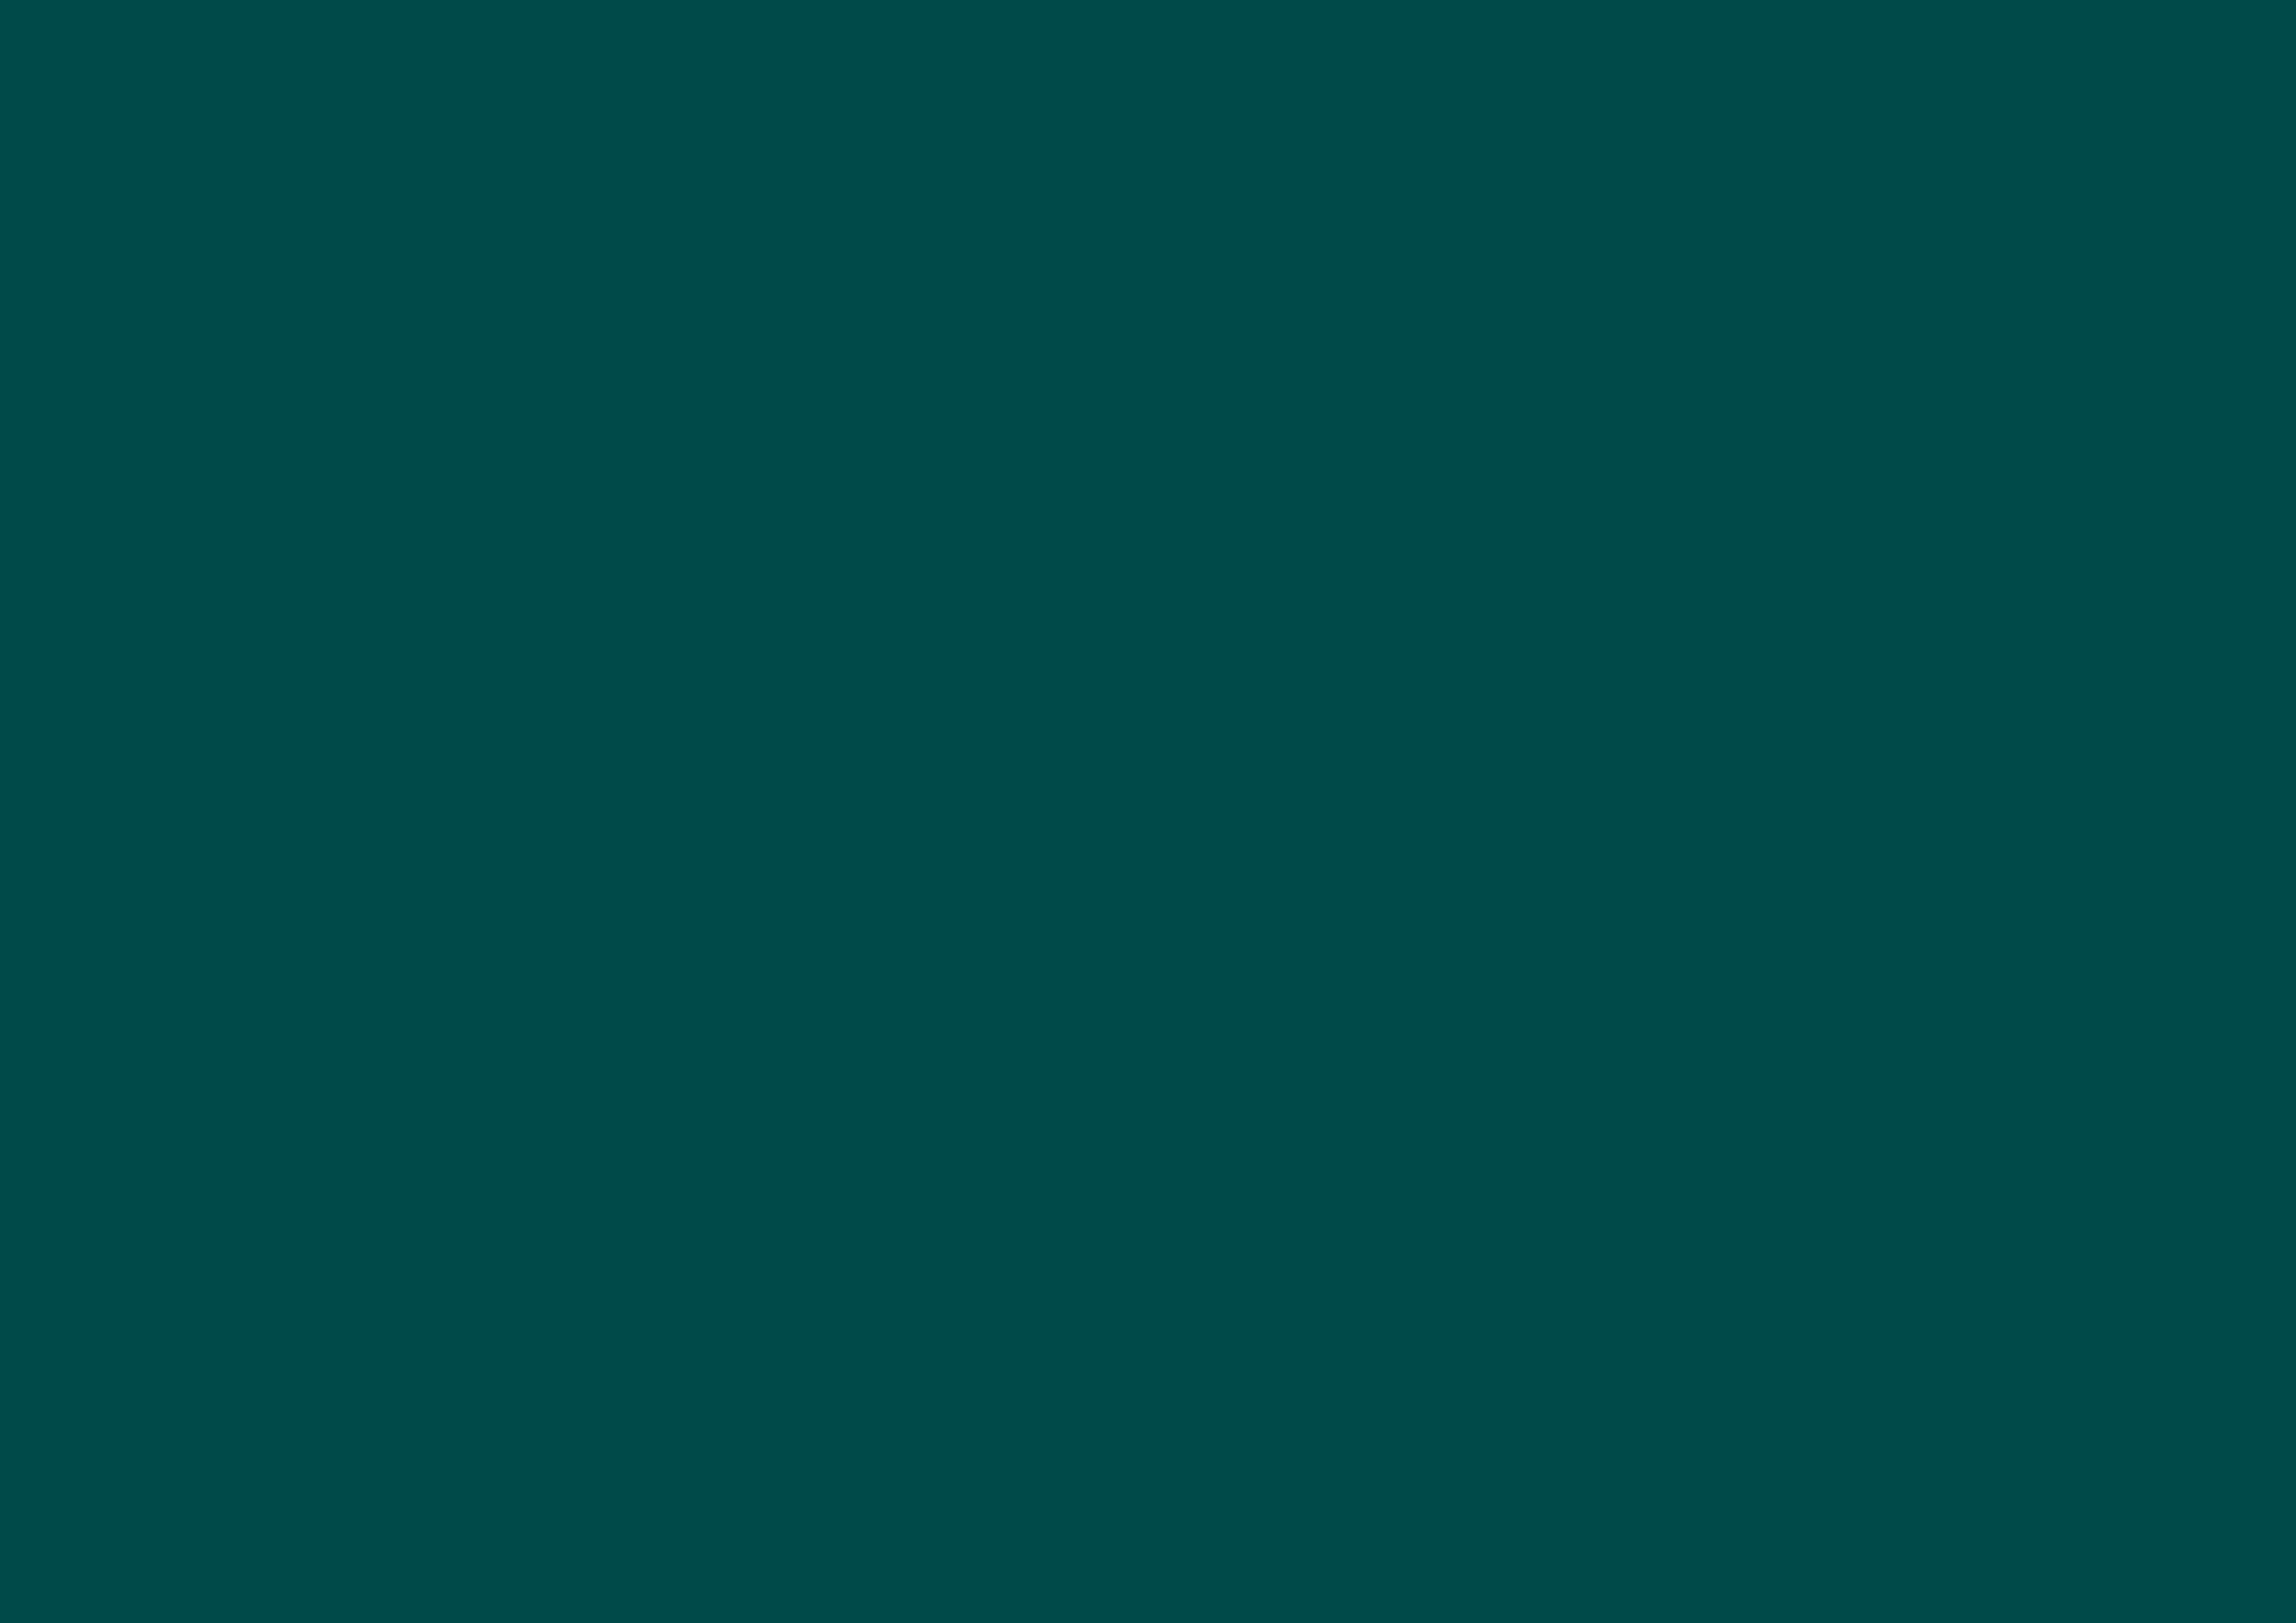 3508x2480 Deep Jungle Green Solid Color Background